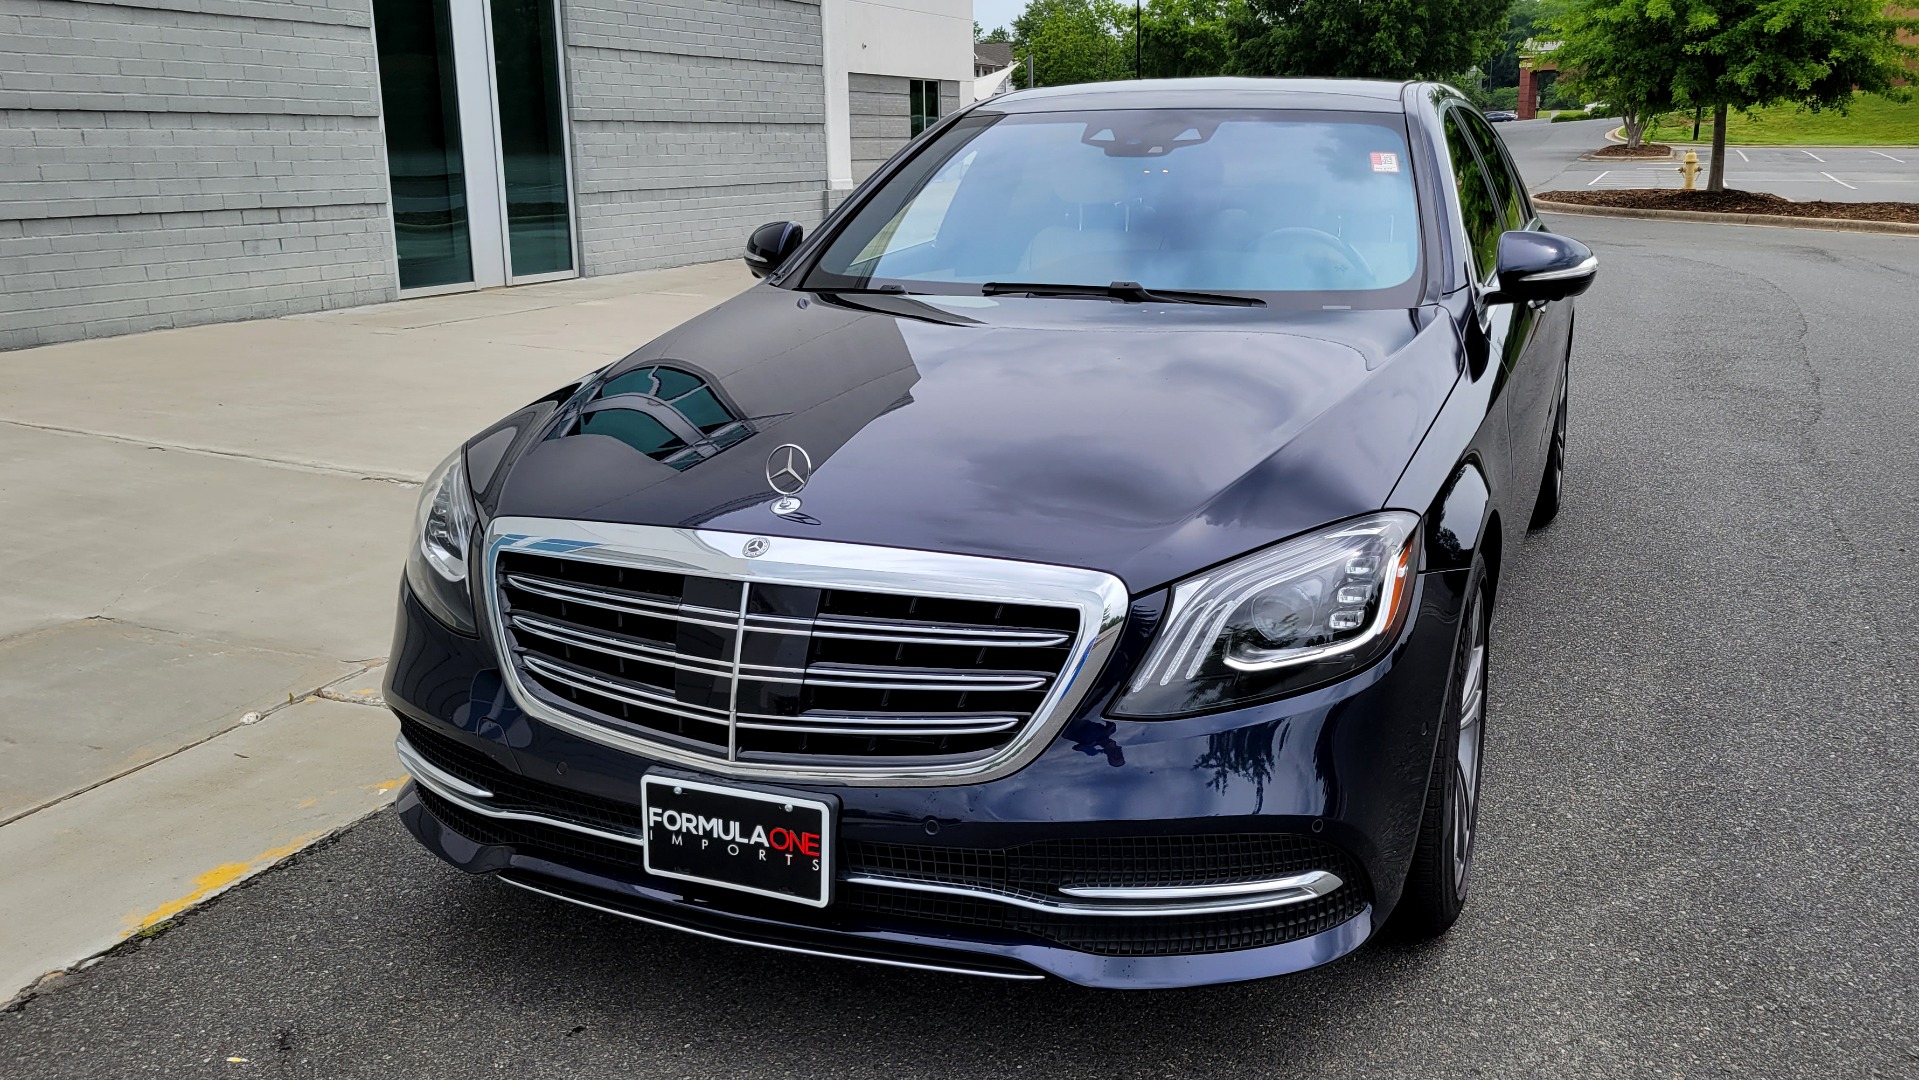 Used 2019 Mercedes-Benz S-CLASS S 560 4MATIC PREMIUM / DRVR ASST / WARMTH / NAV / REARVIEW for sale $72,995 at Formula Imports in Charlotte NC 28227 2